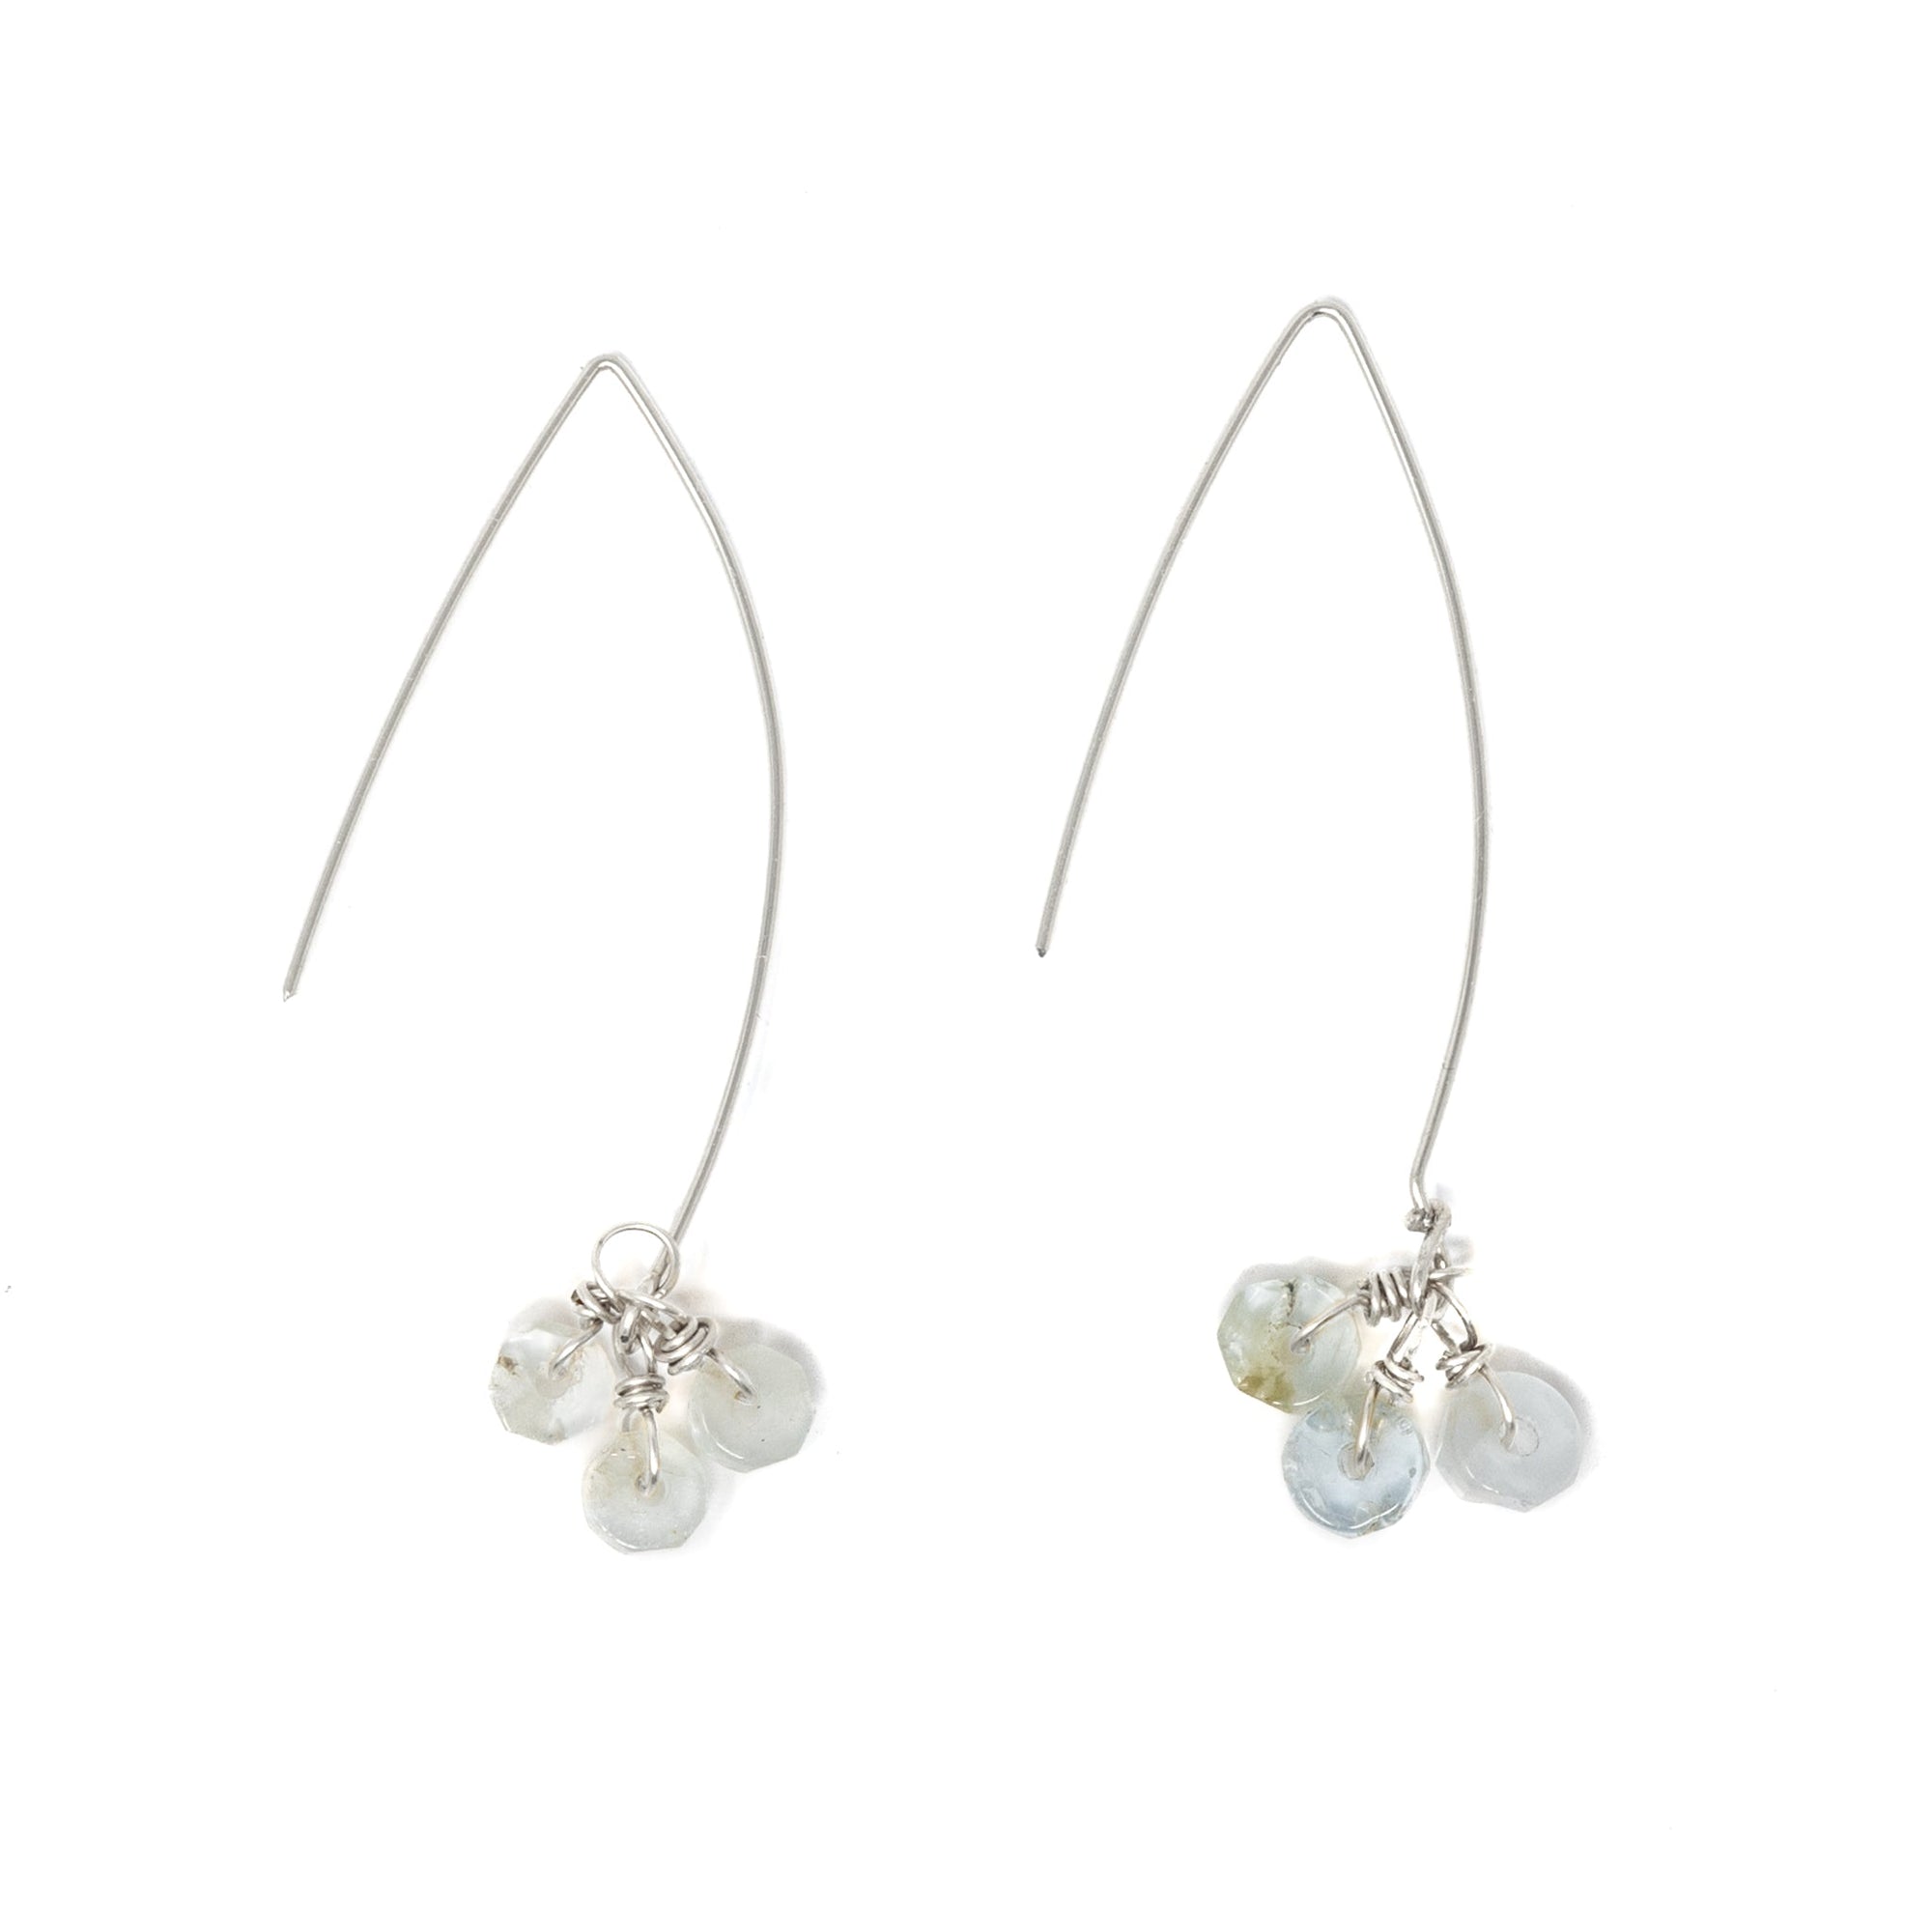 Aquamarine - Intention & Healing Earrings in Silver